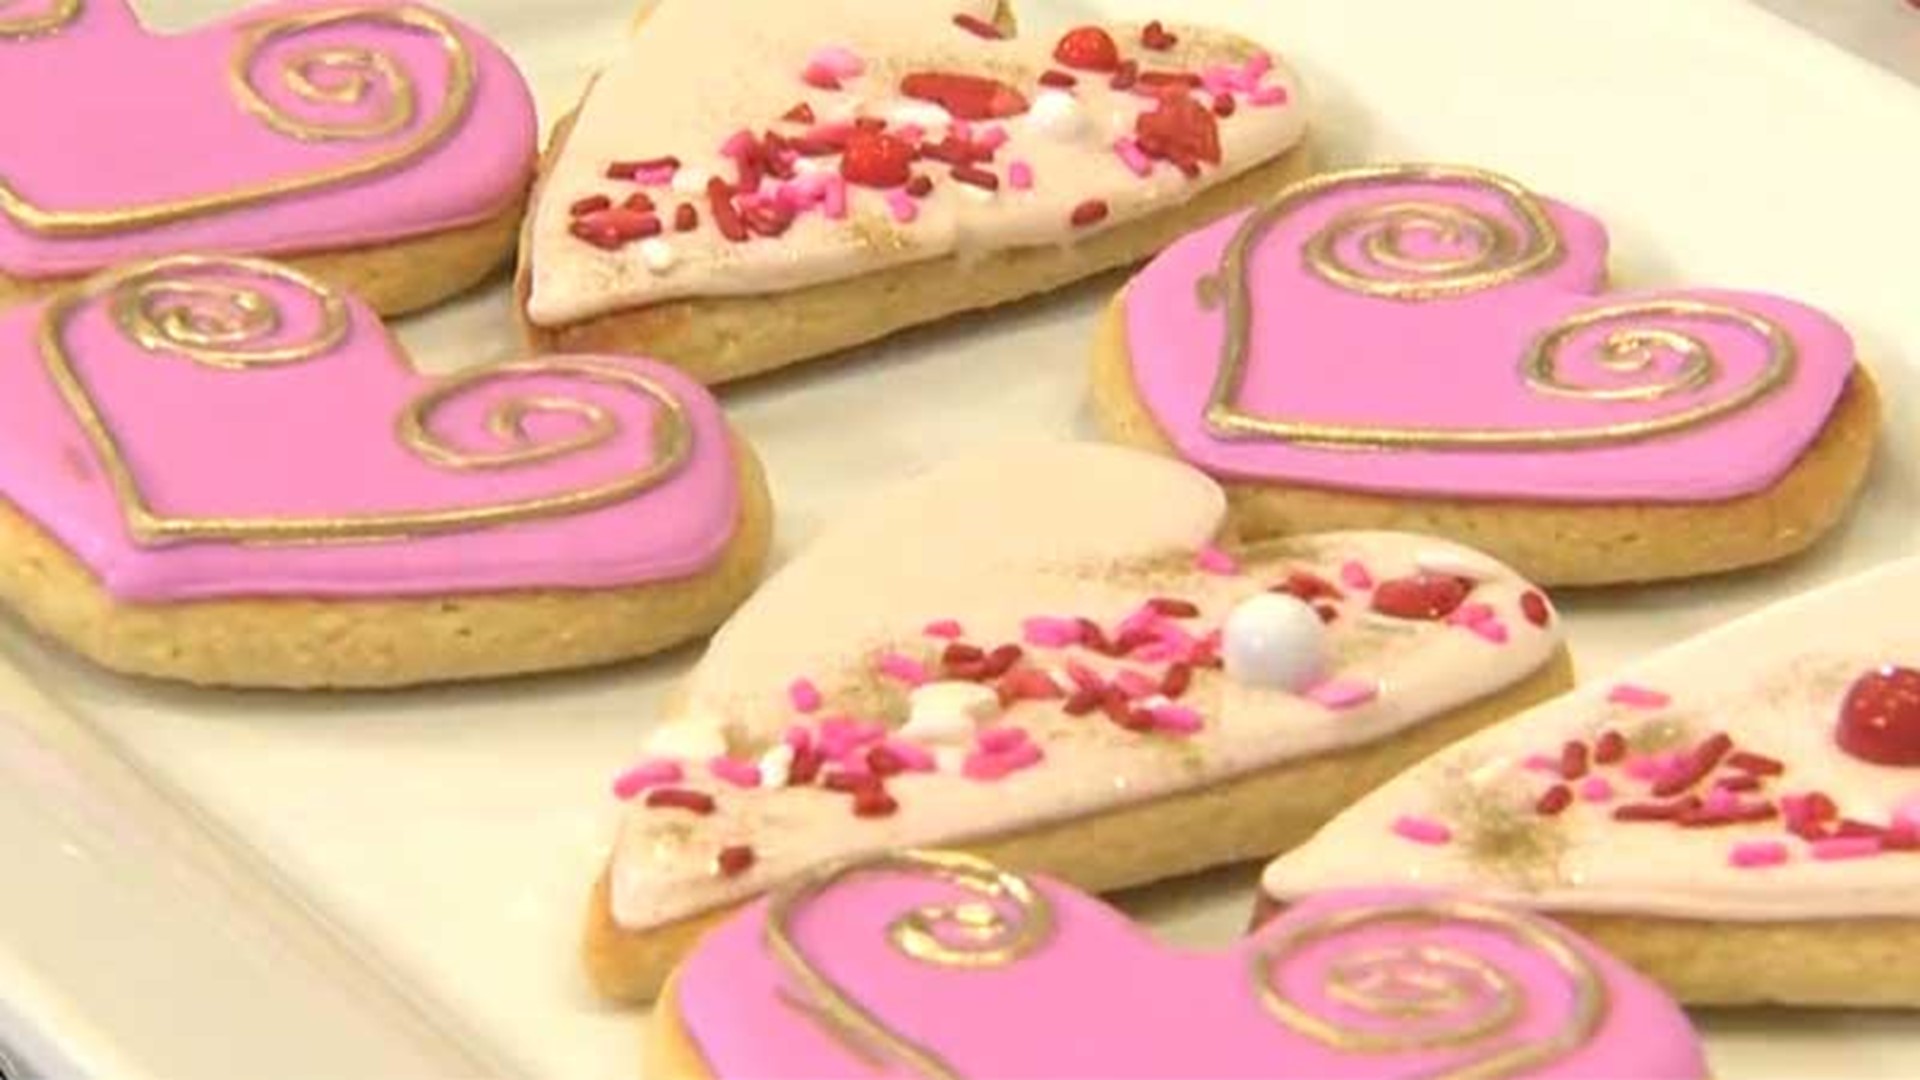 Nature's Eats shows how to make Valentine's Day cookies using almond flavor. They're high in protein and gluten-free for people on Paleo and Keto diets.